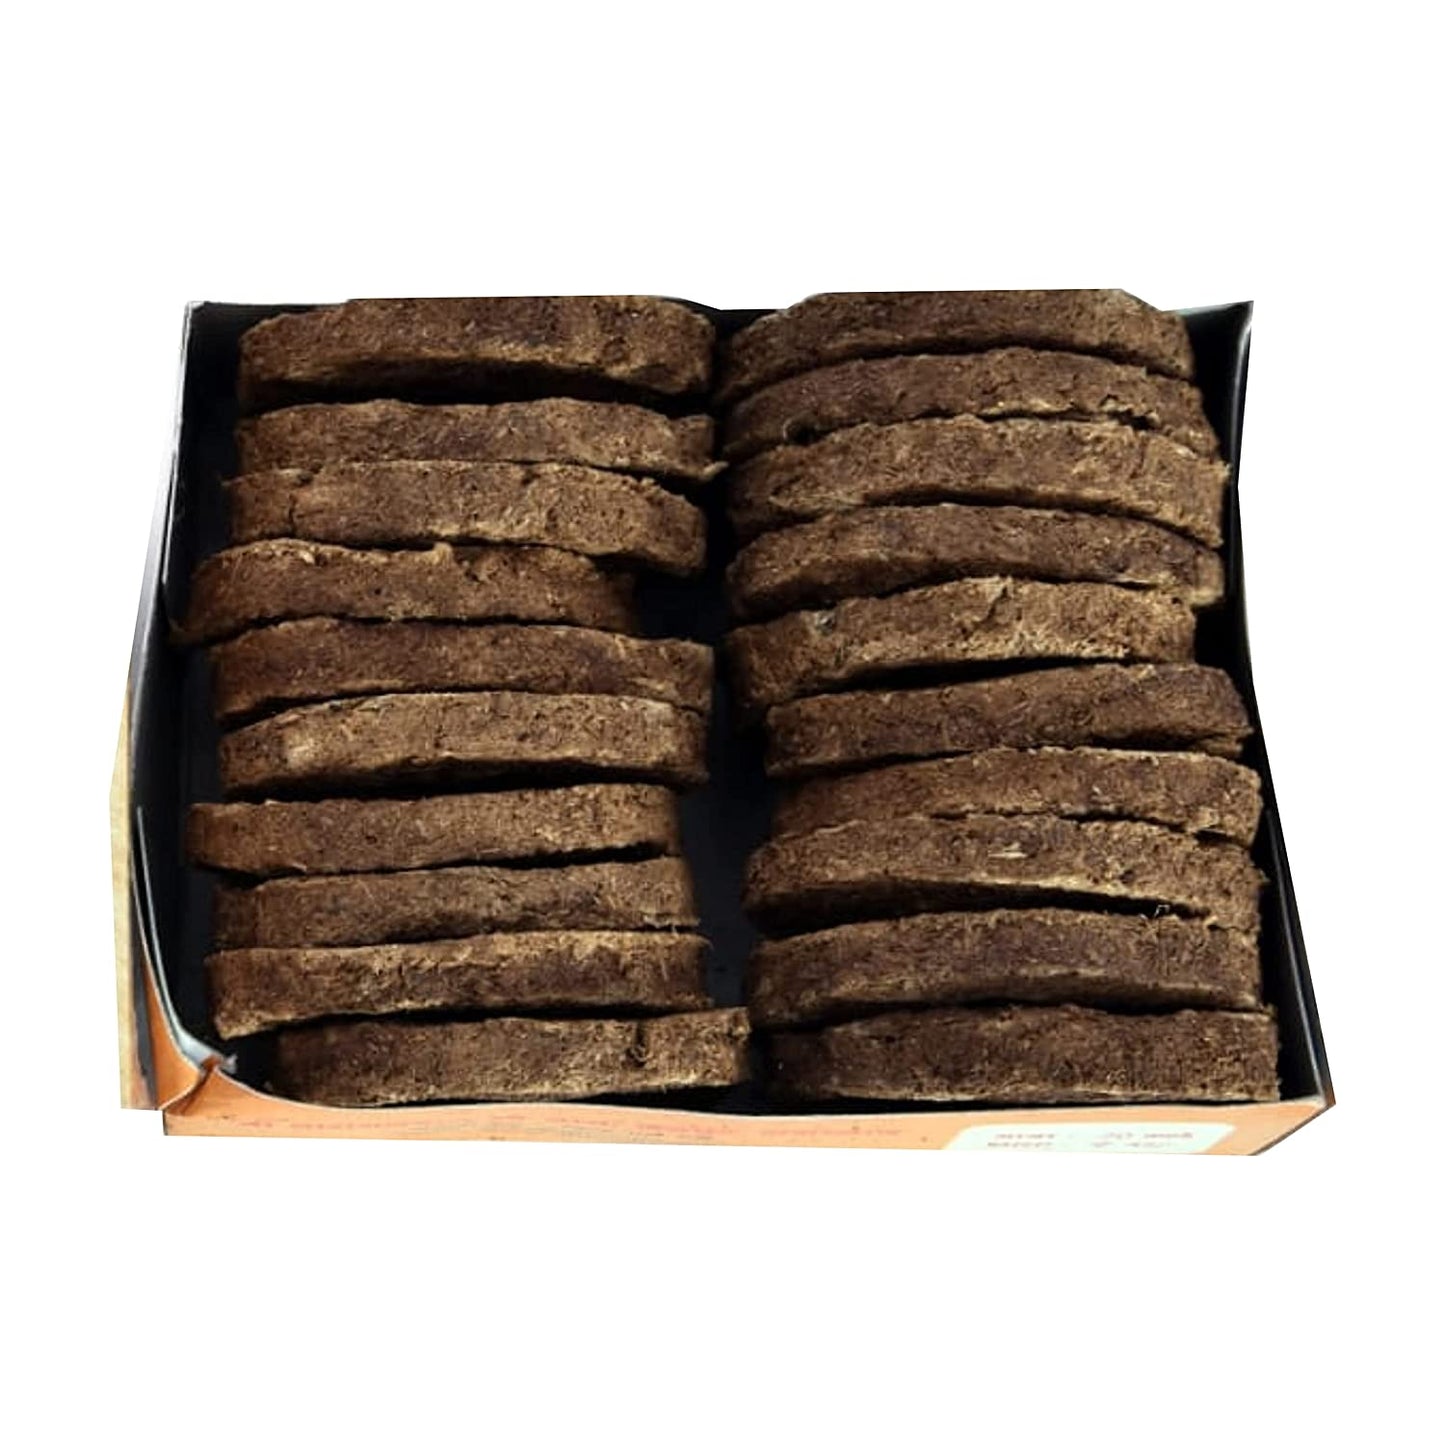 Dhenum Cow Dung Cakes (20 cakes)